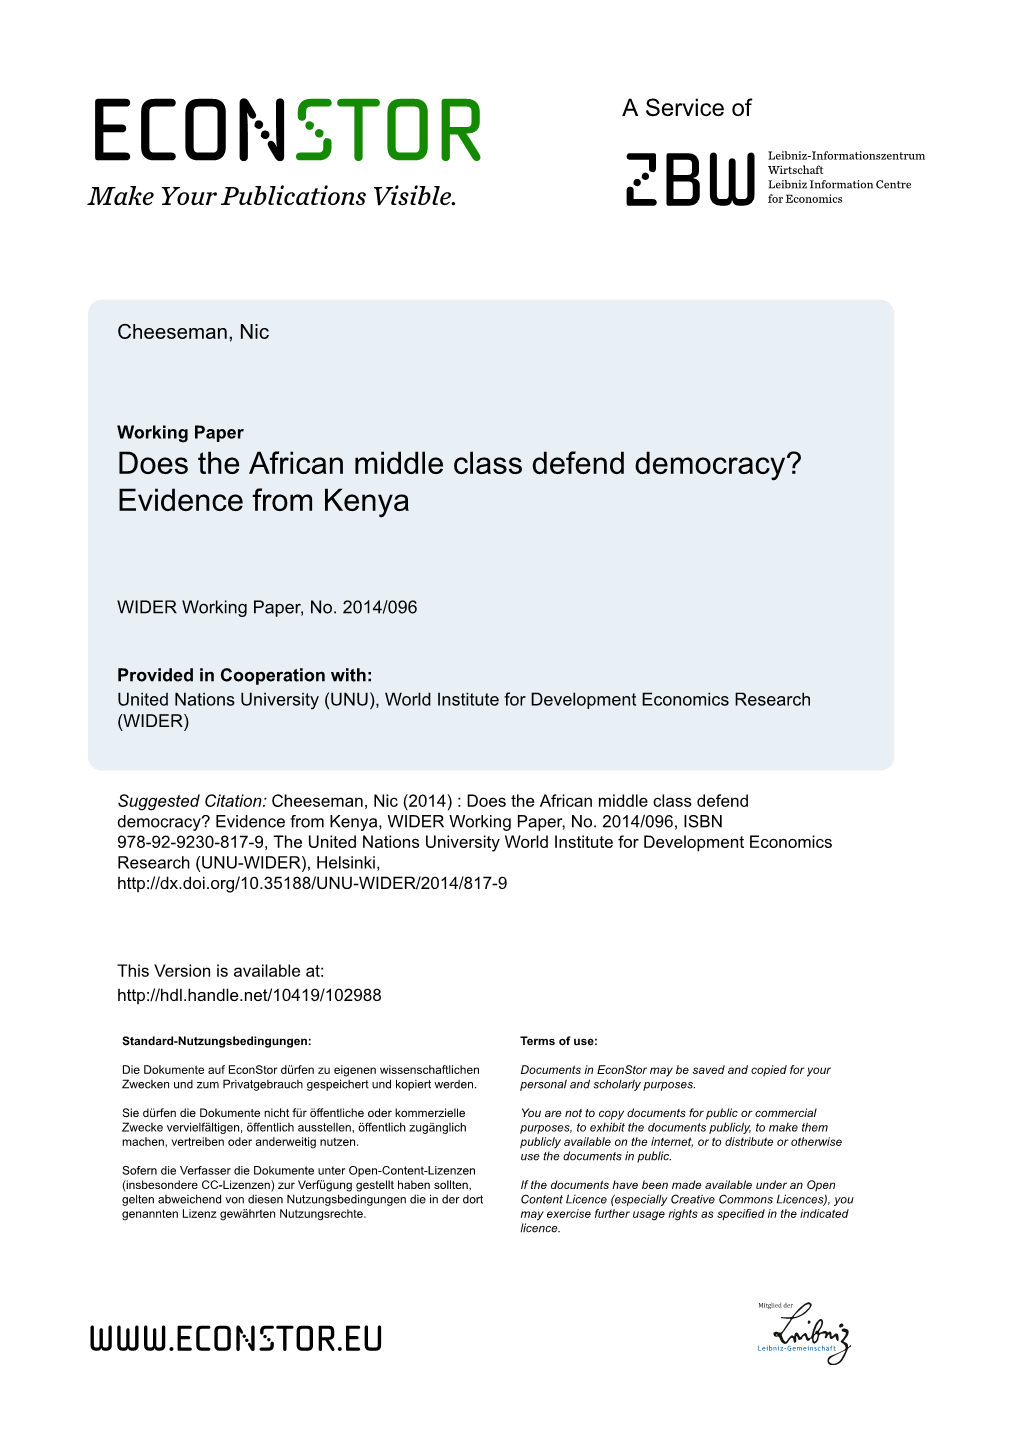 Does the African Middle Class Defend Democracy? Evidence from Kenya